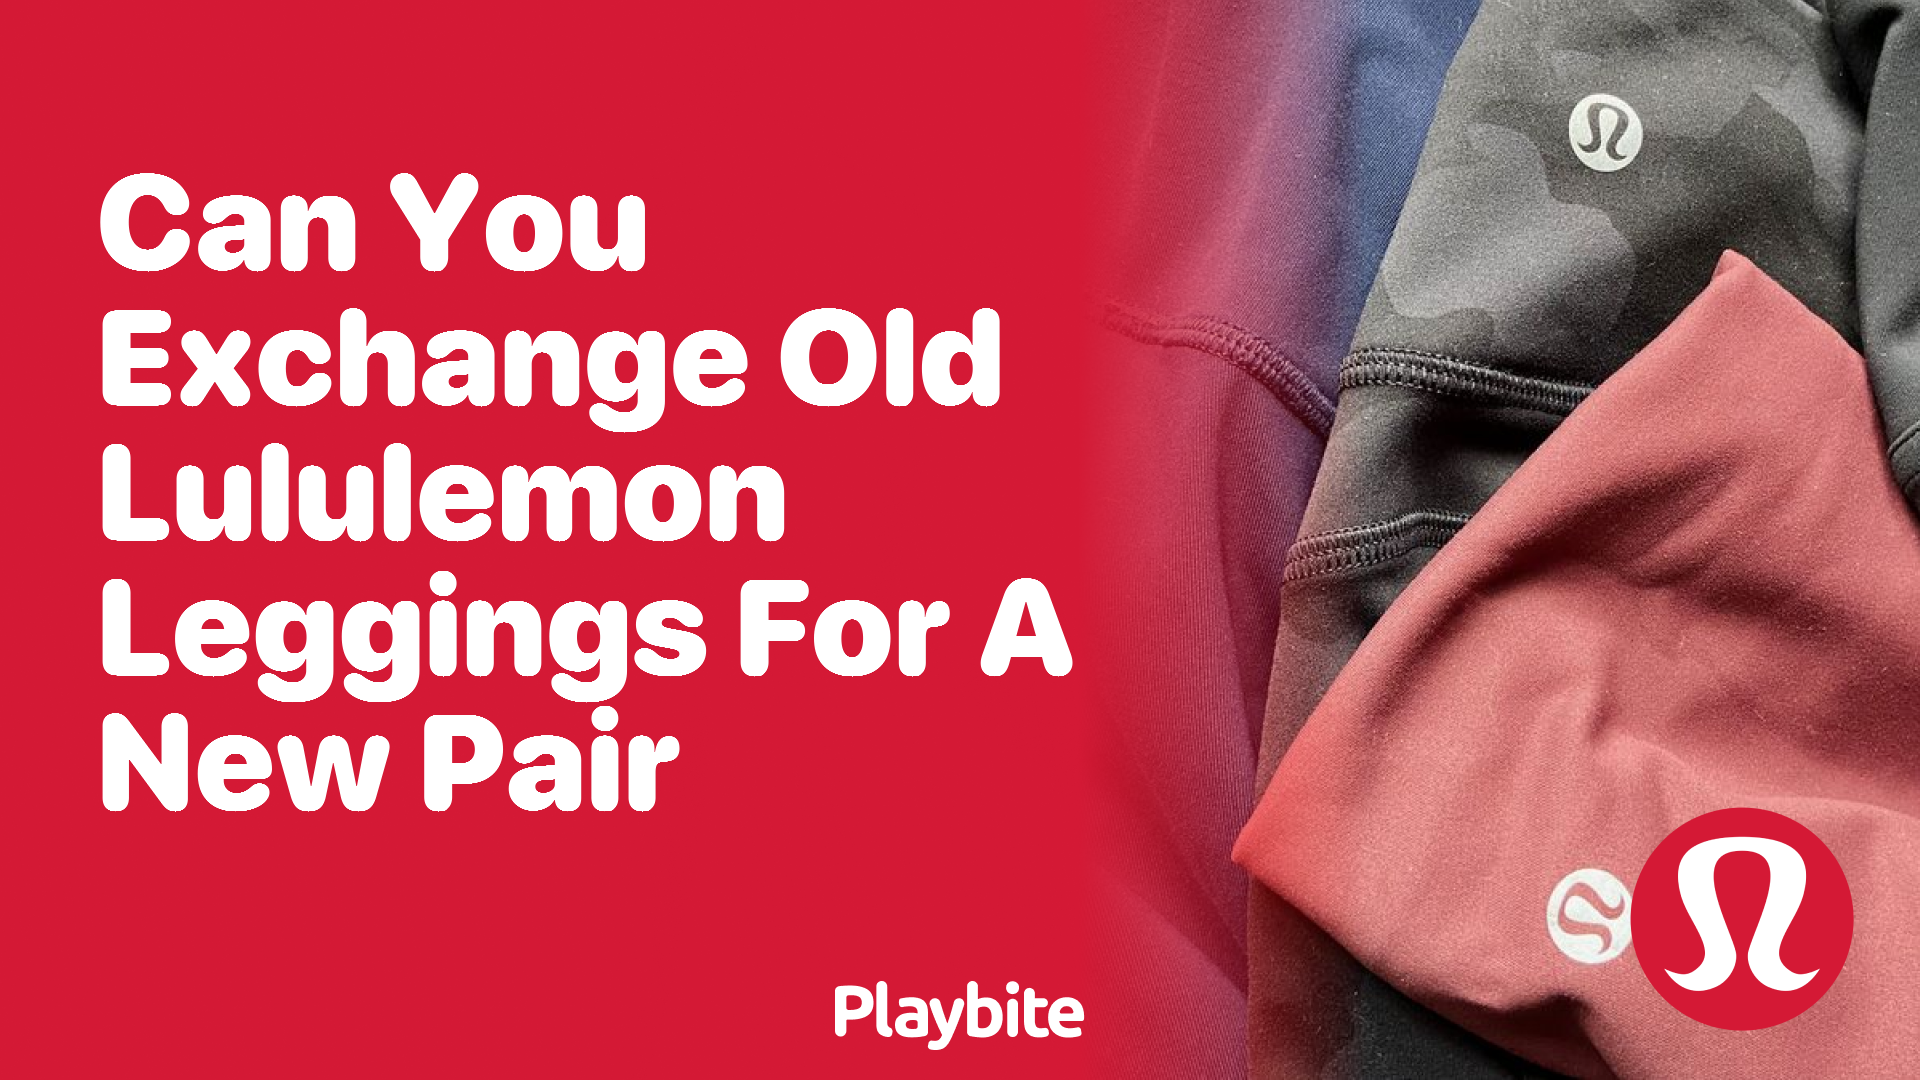 Can You Exchange Lululemon Leggings for a New Pair? - Playbite